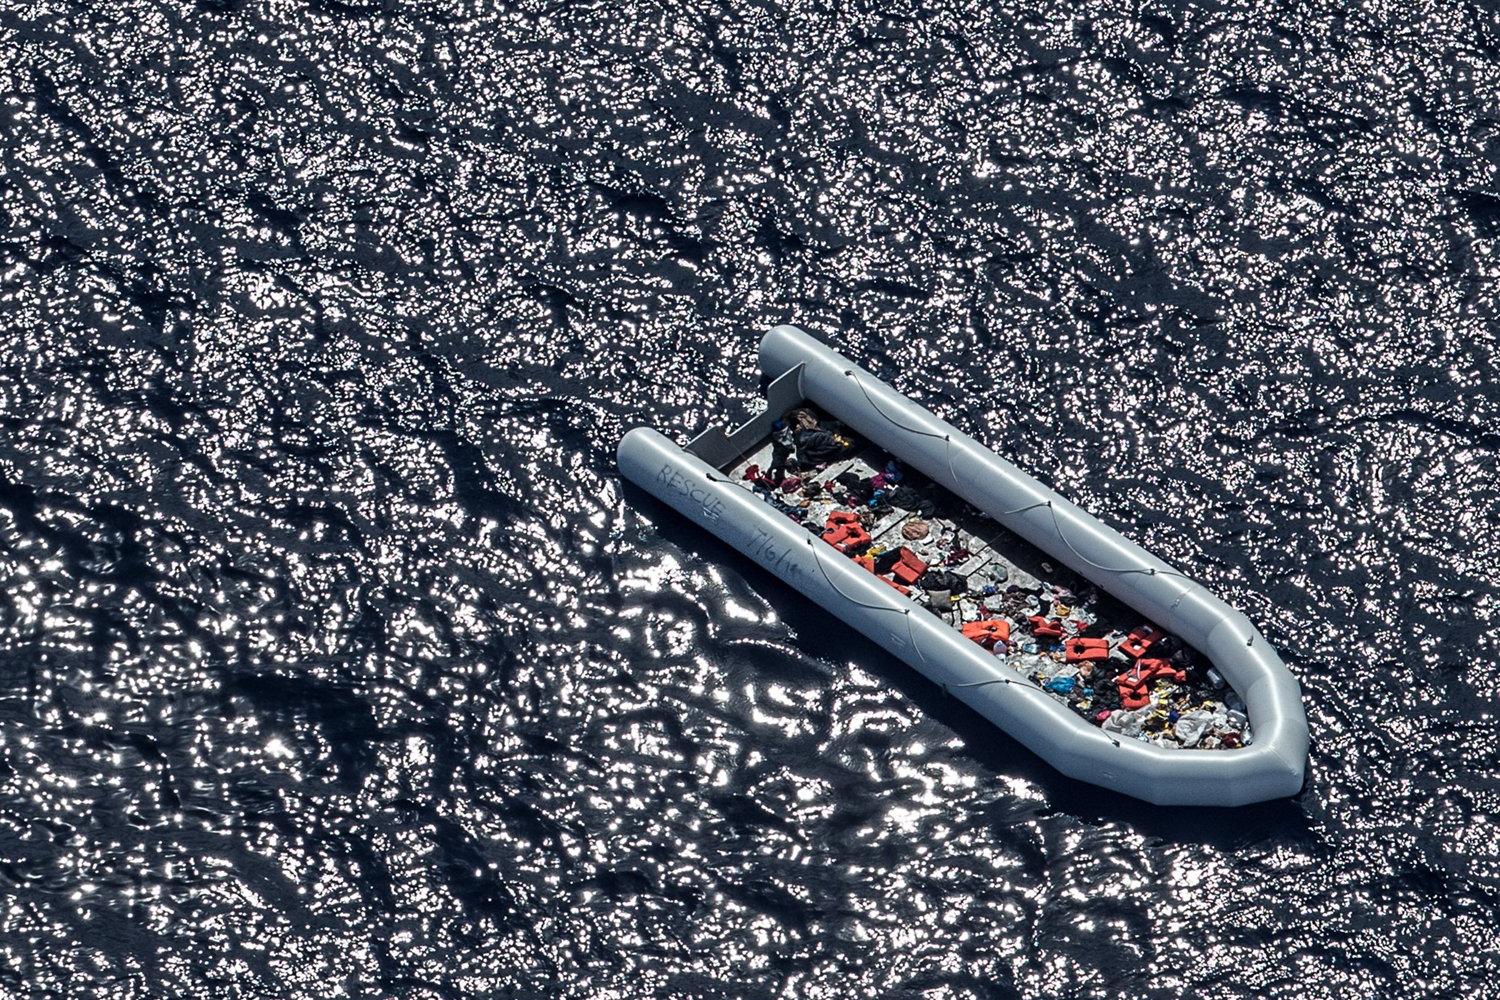 An empty dinghy with leftover lifesavers after the Italian navy rescued asylum seekers off the coast of Africa, June 7, 2014.